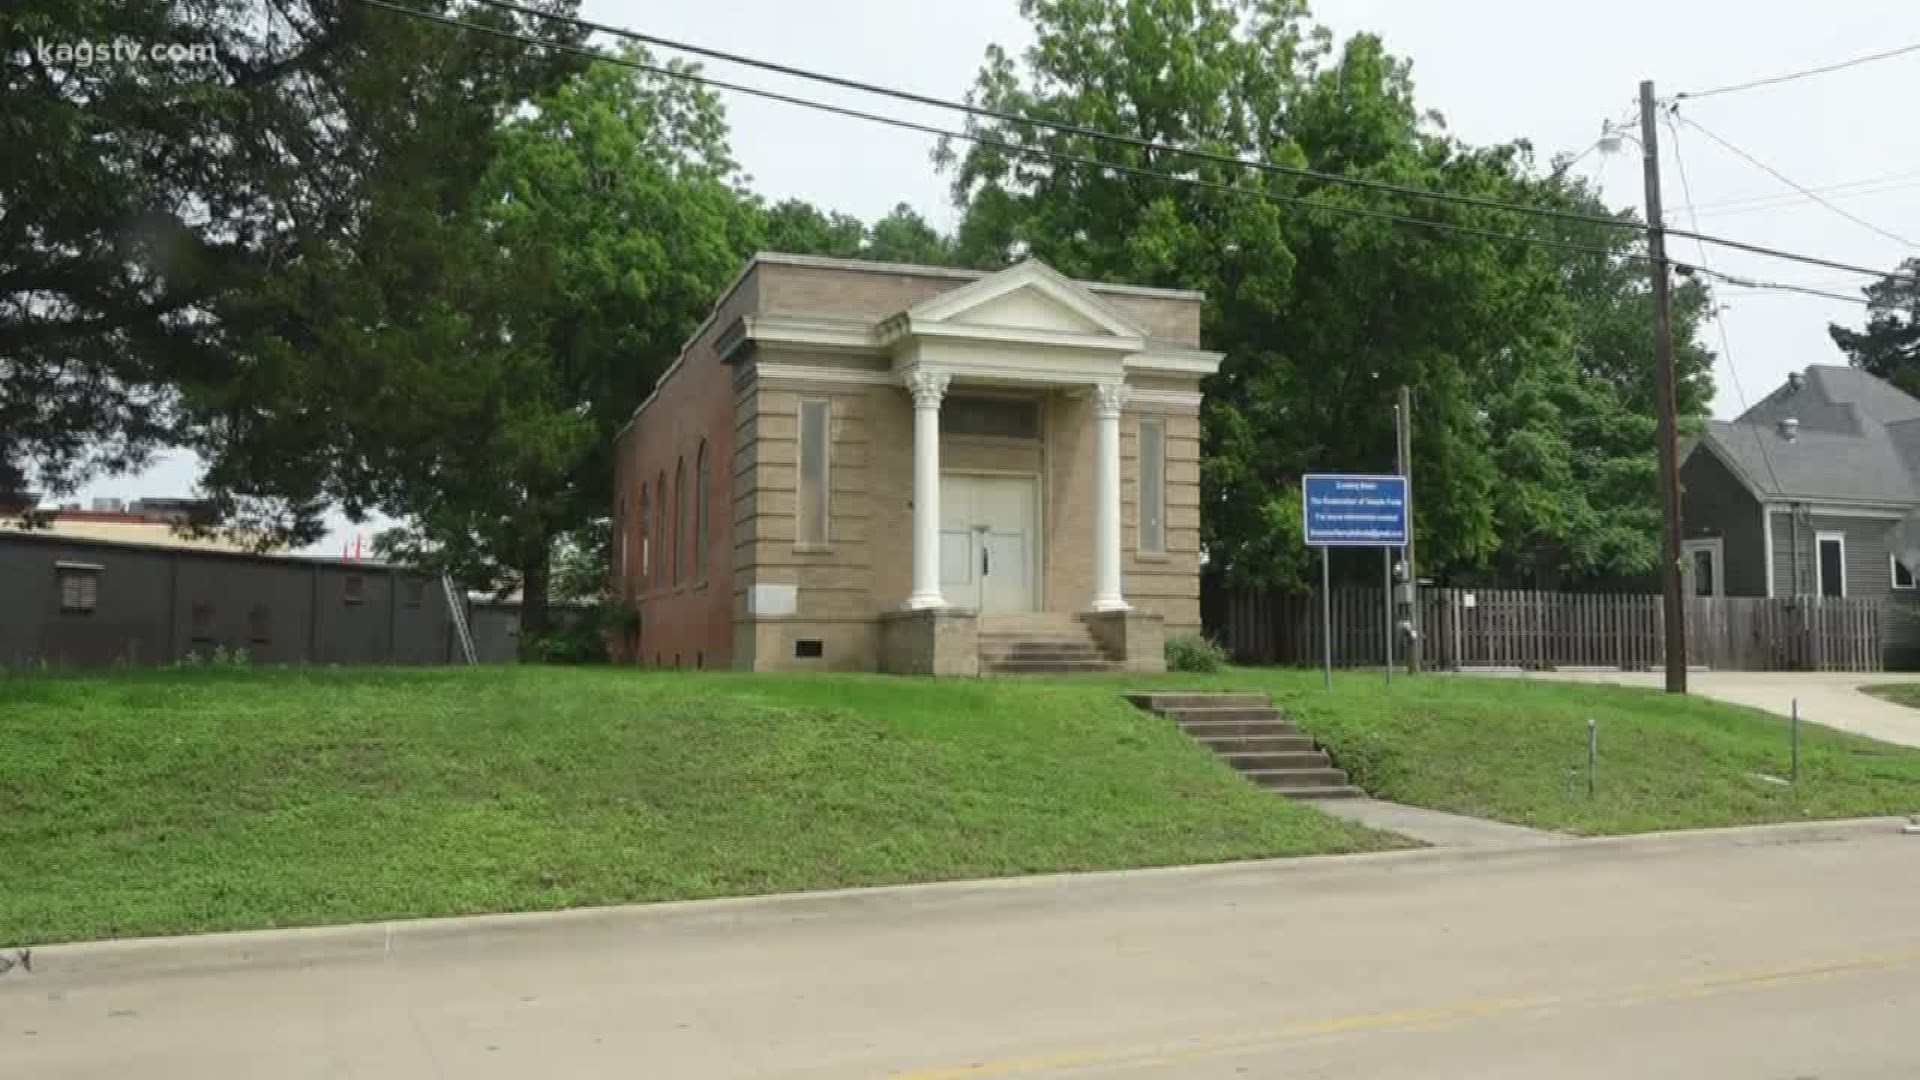 Temple Freda was built in the 20th century and was the first synagogue in the Brazos Valley.